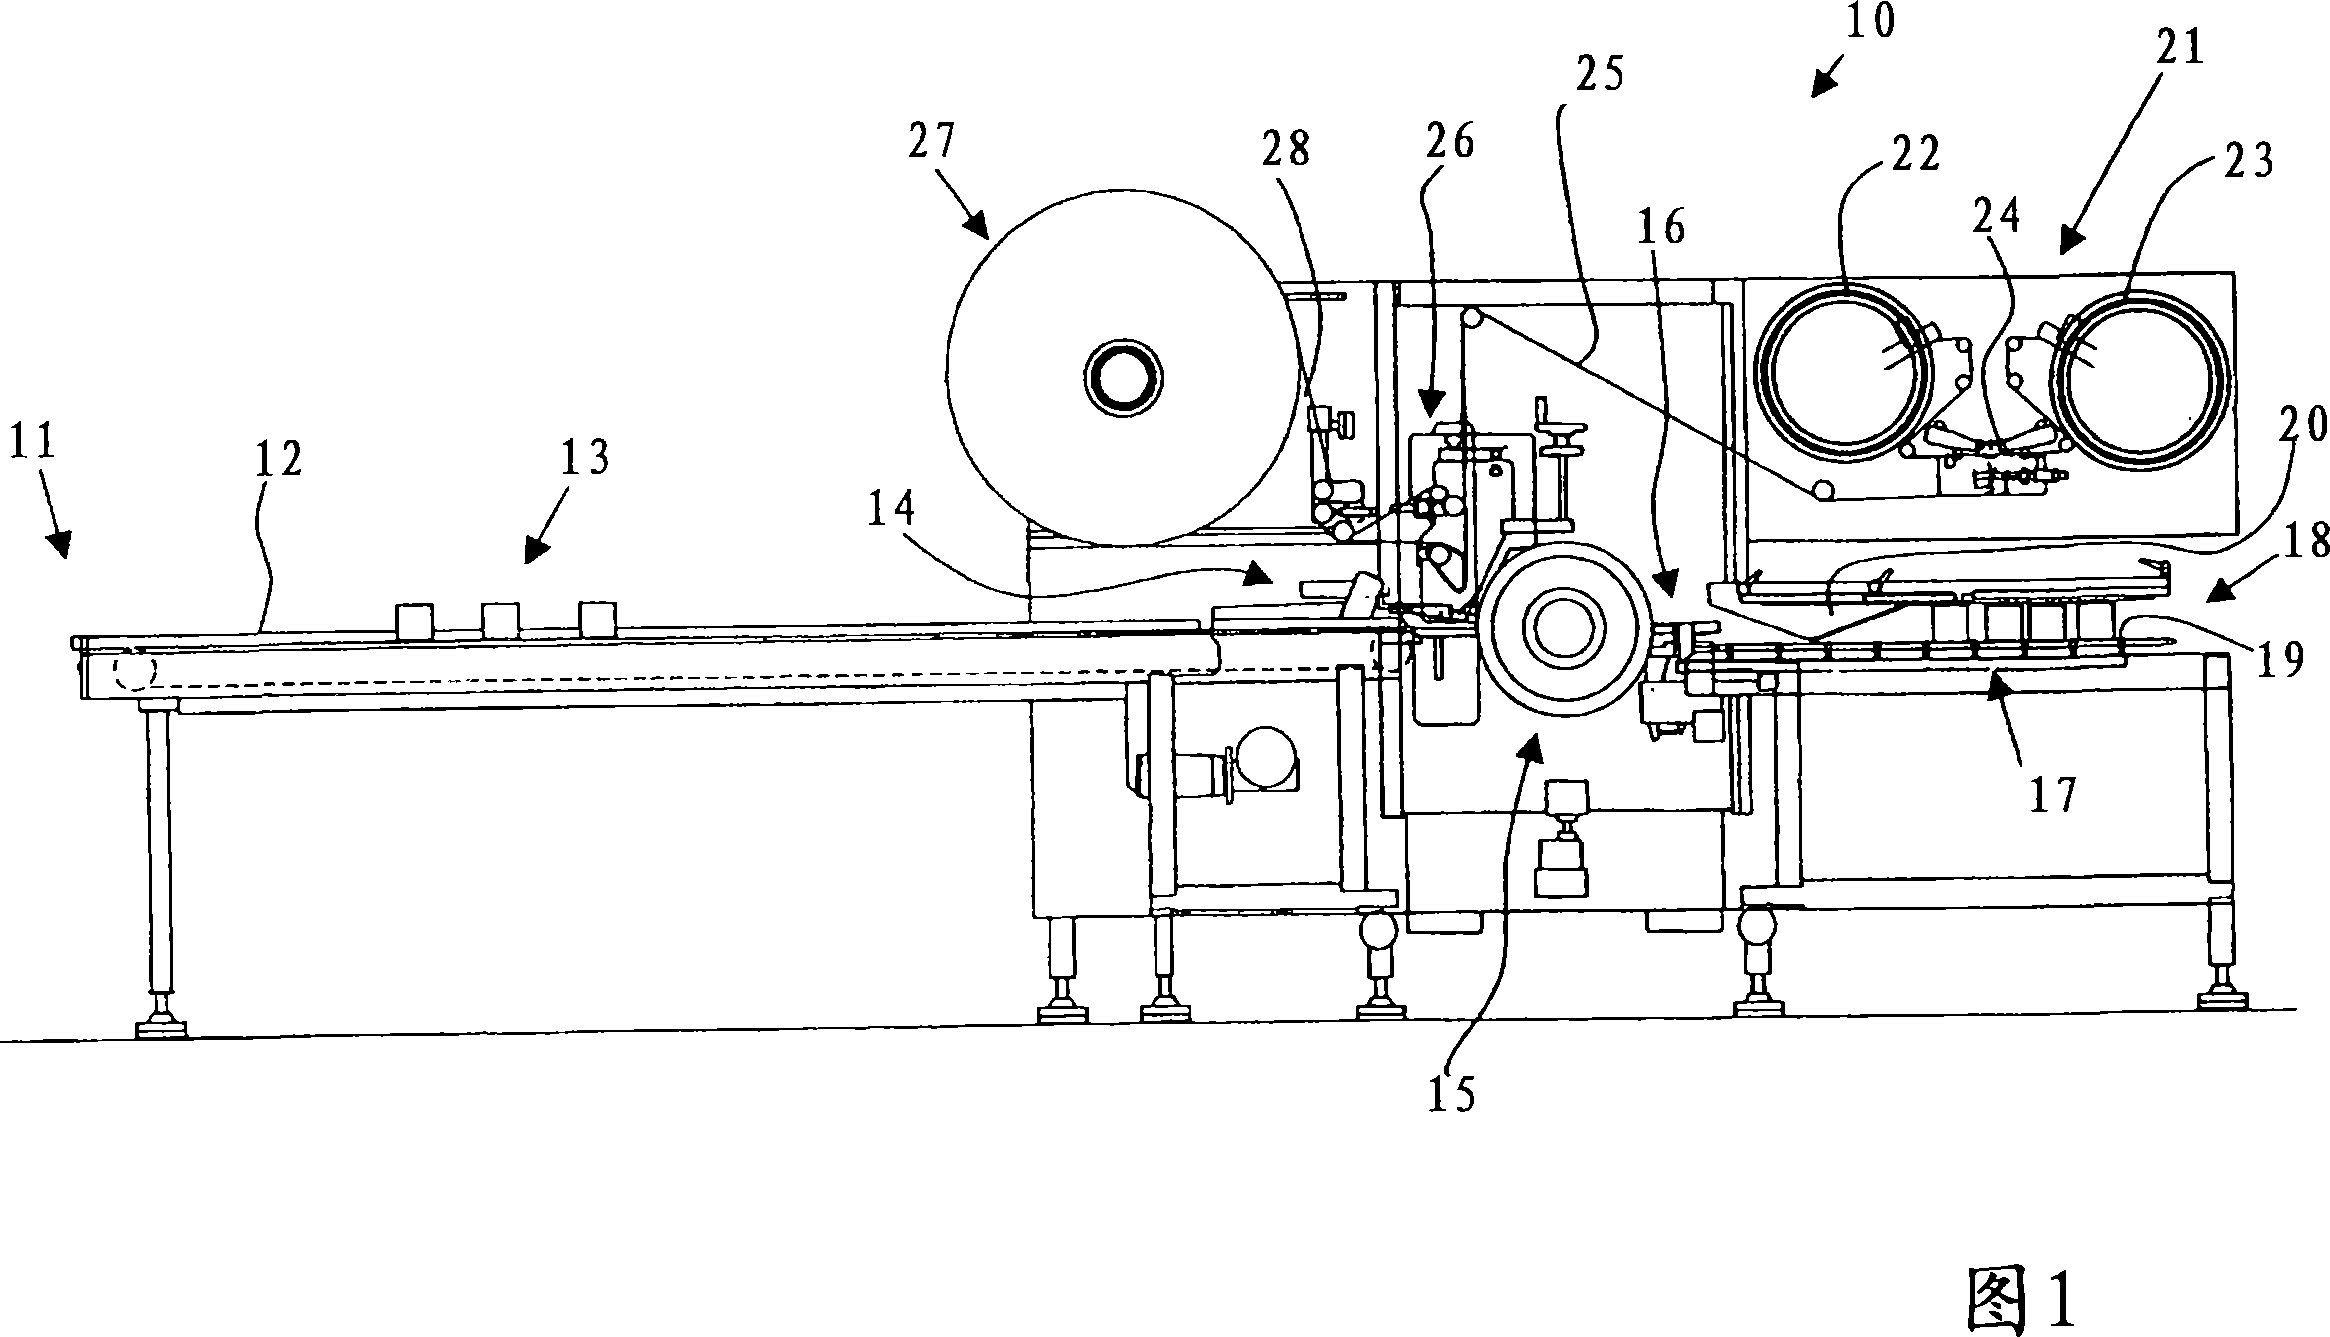 Rotating-head machine for packaging products in sealed film